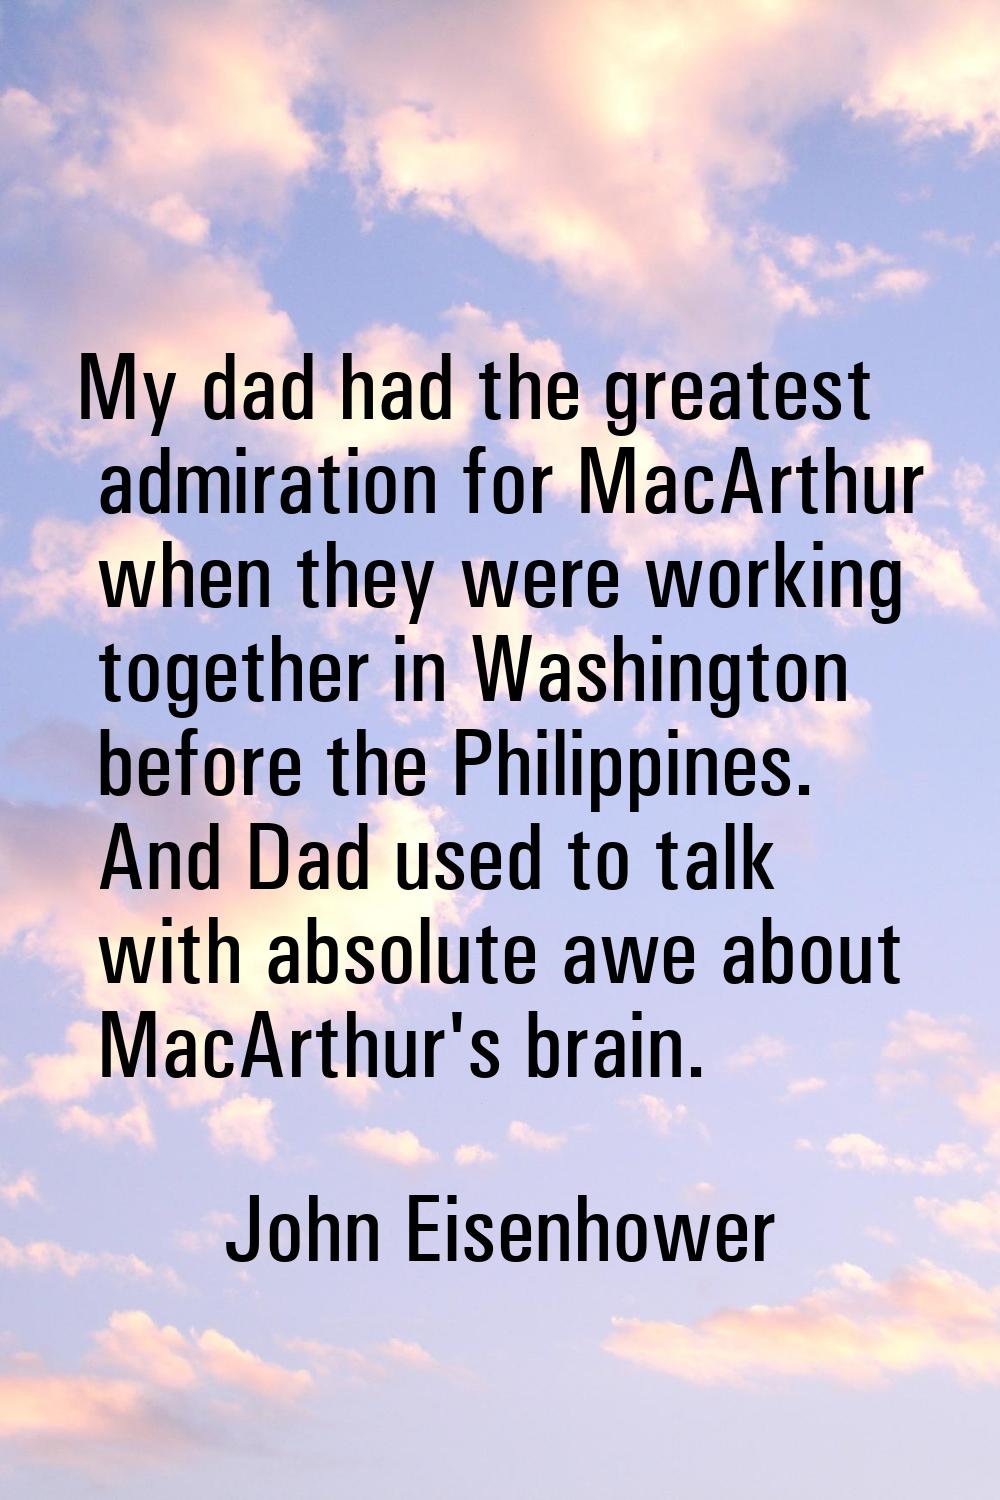 My dad had the greatest admiration for MacArthur when they were working together in Washington befo